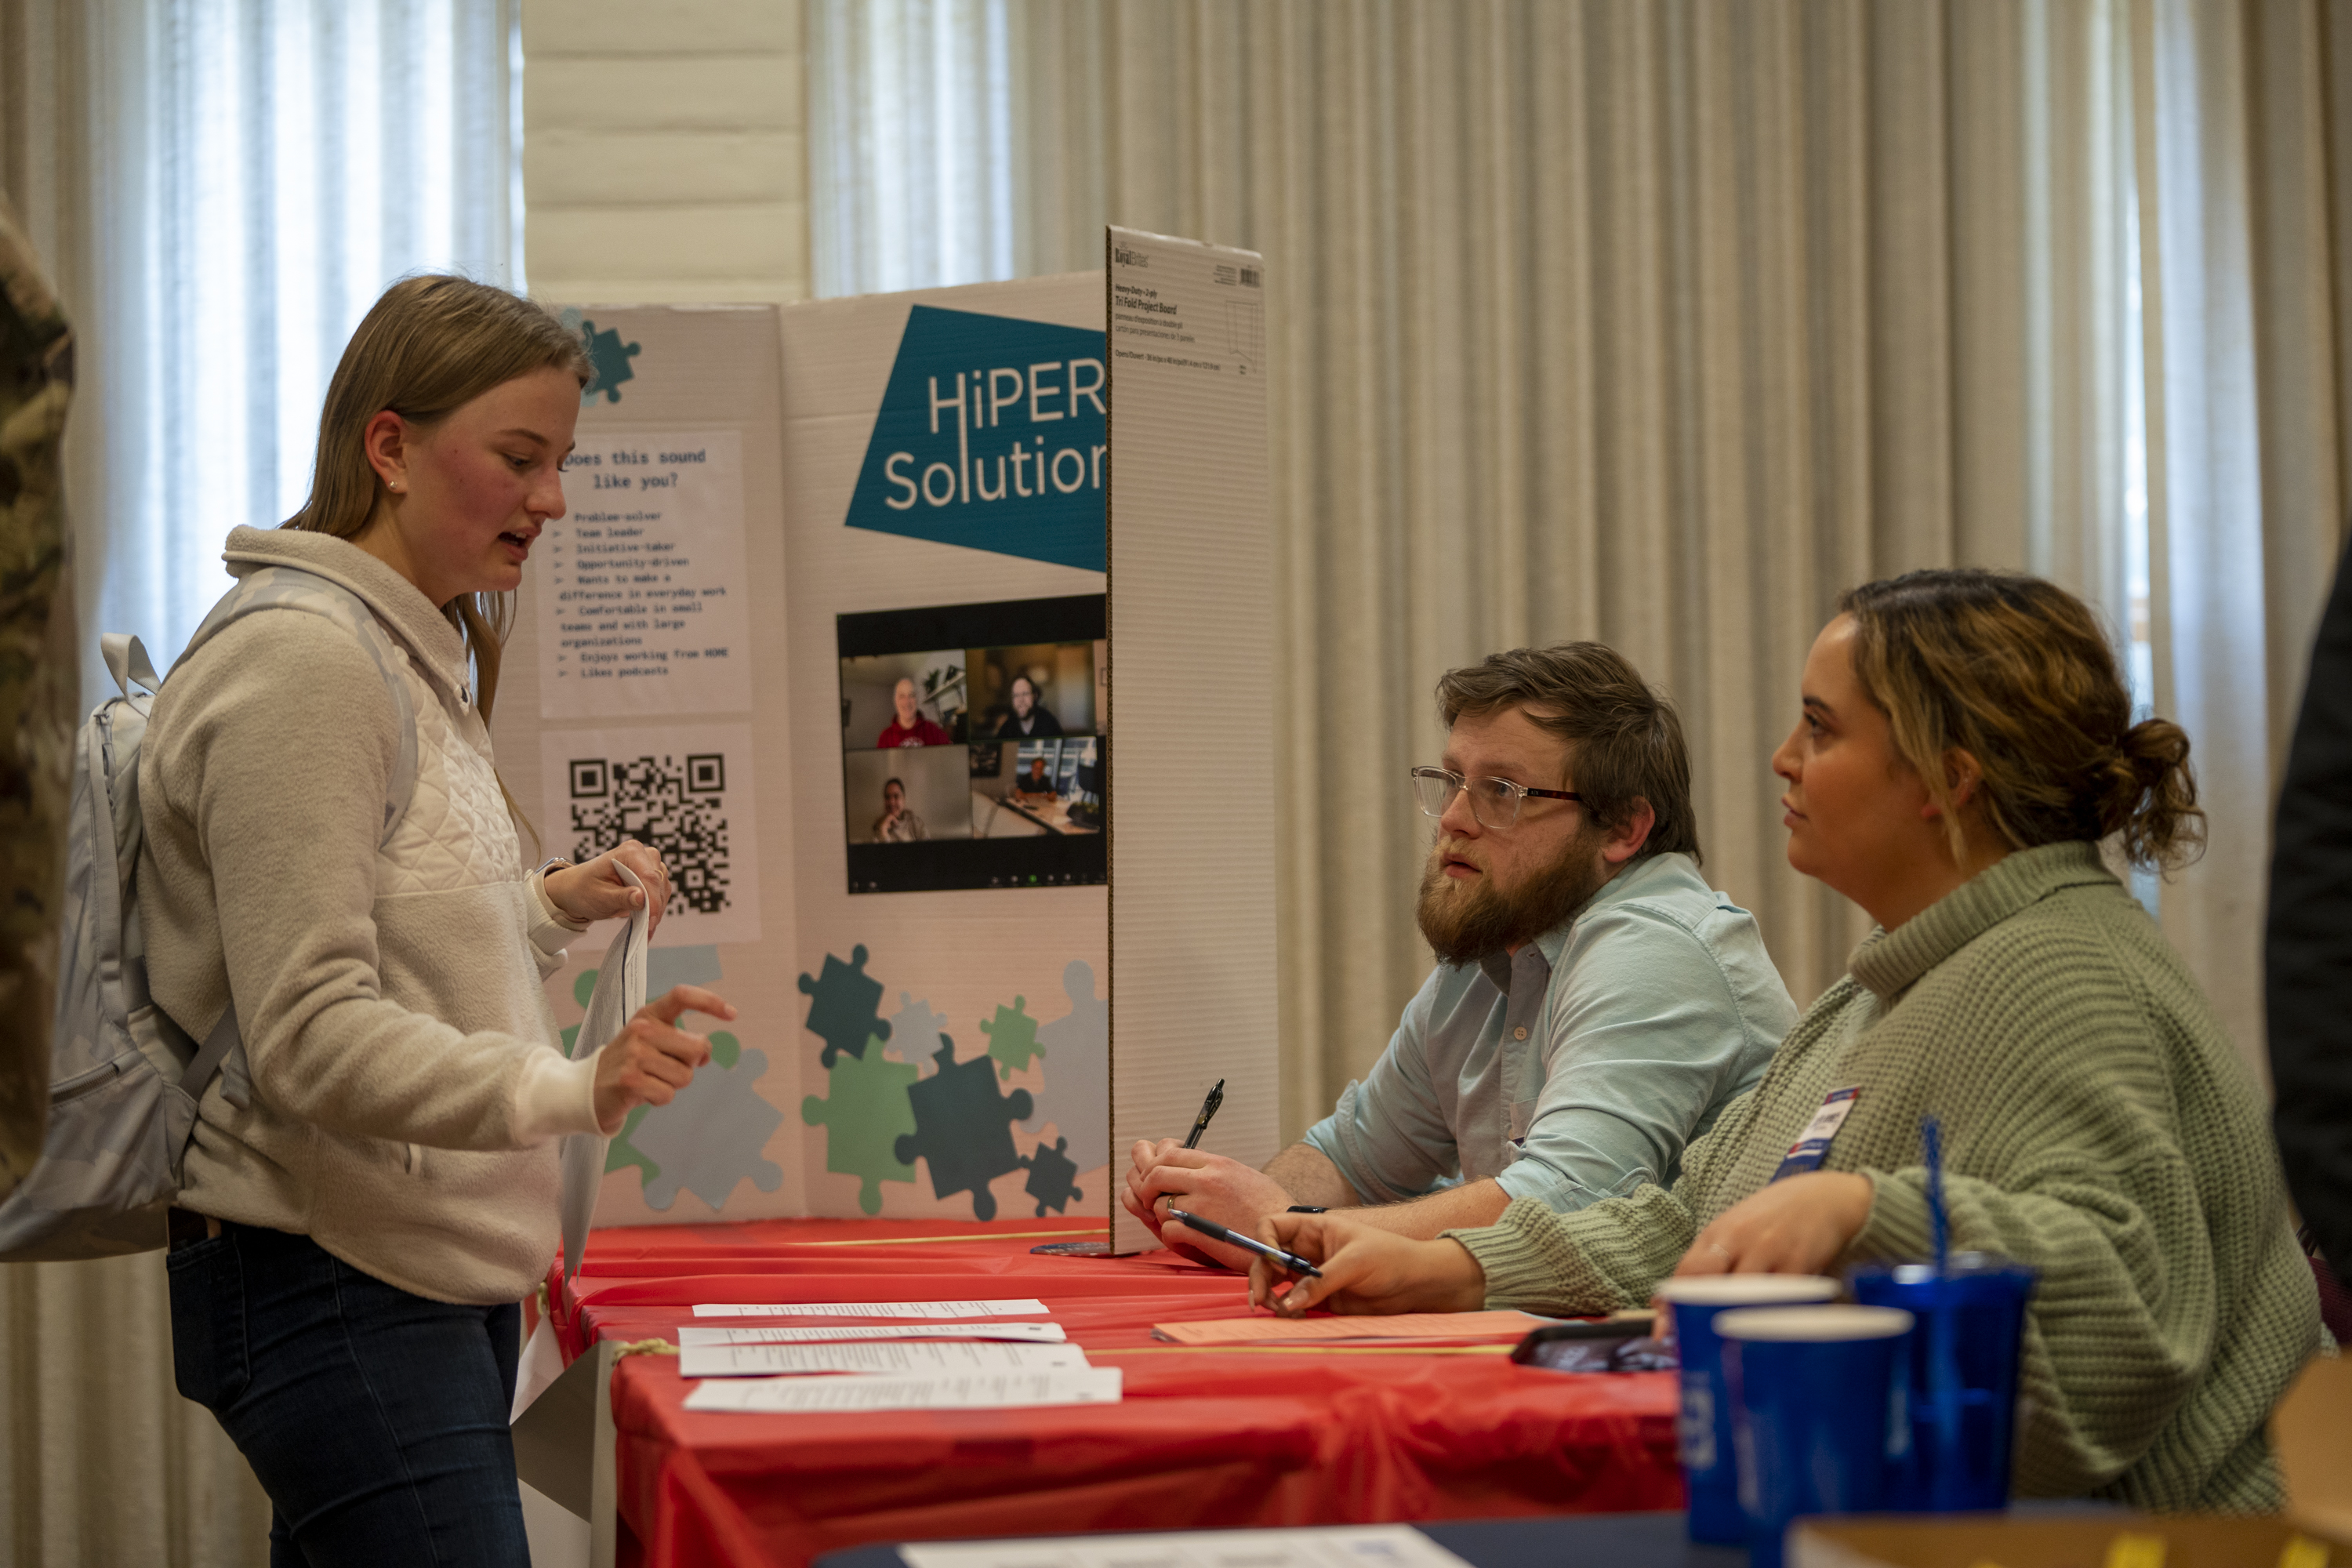 Student talking to HiPER Solutions reps